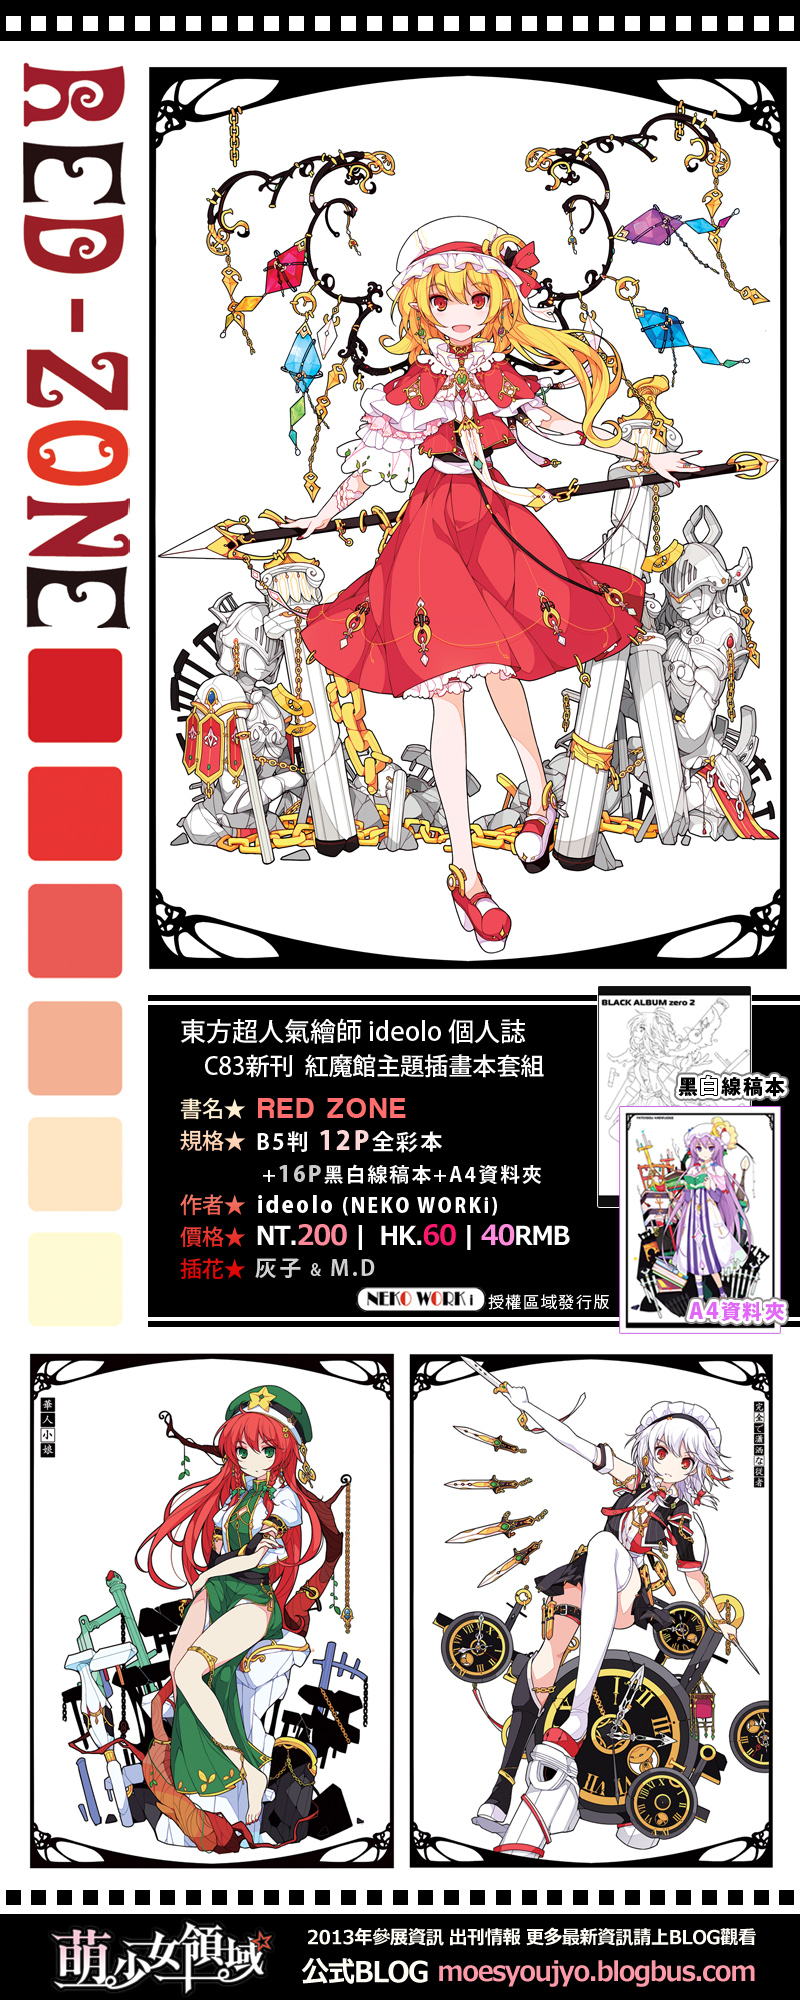 RED ZONE 試閱圖